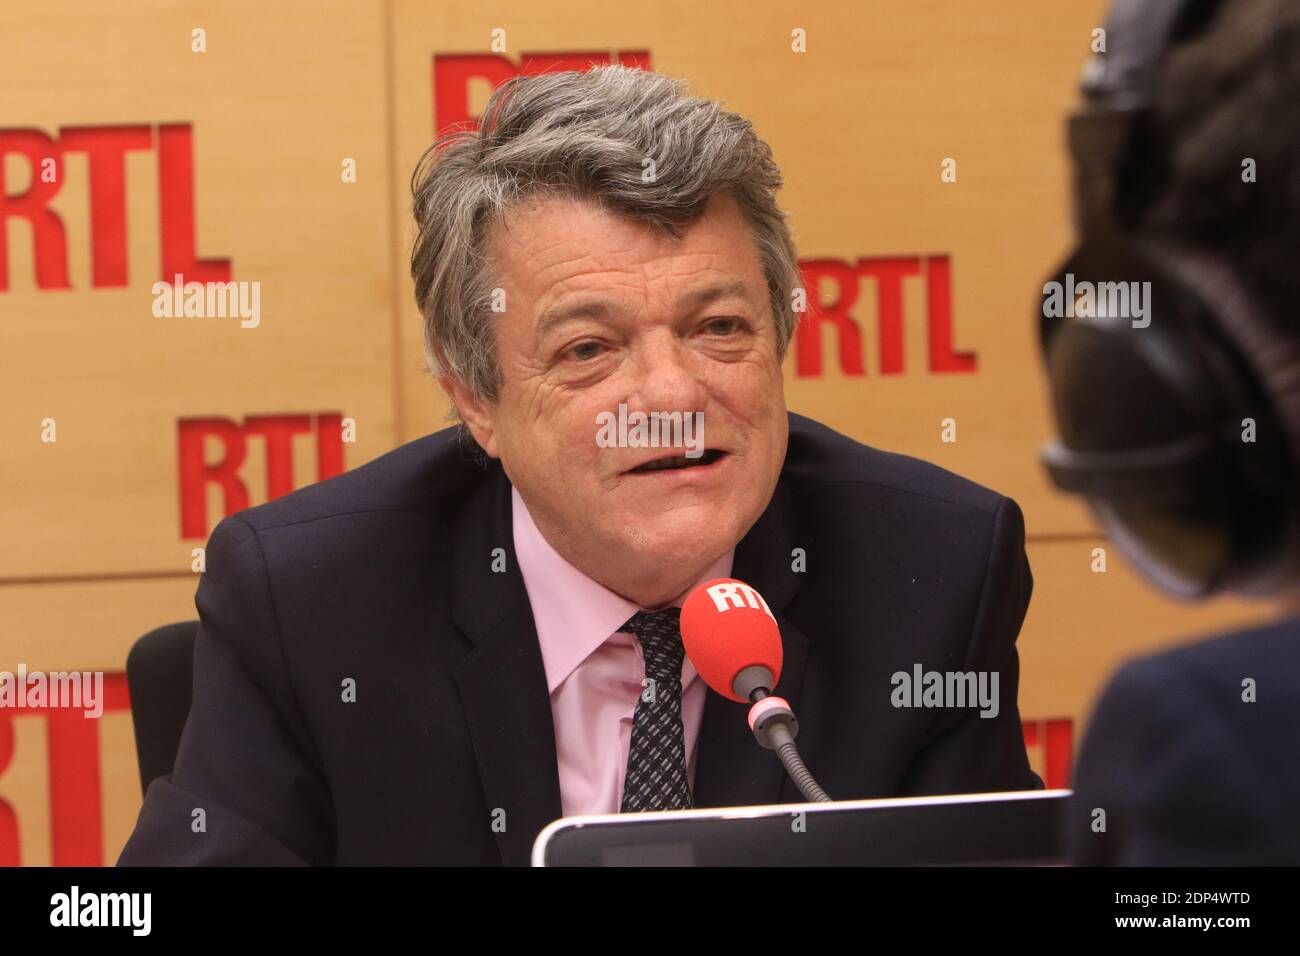 Exclusive - No Web - No Tabloids - Jean-Louis Borloo is interviewed on RTL  radio in Paris, France on June 18, 2015. Photo by Frederic  Bukajlo/ABACAPRESS.COM Stock Photo - Alamy